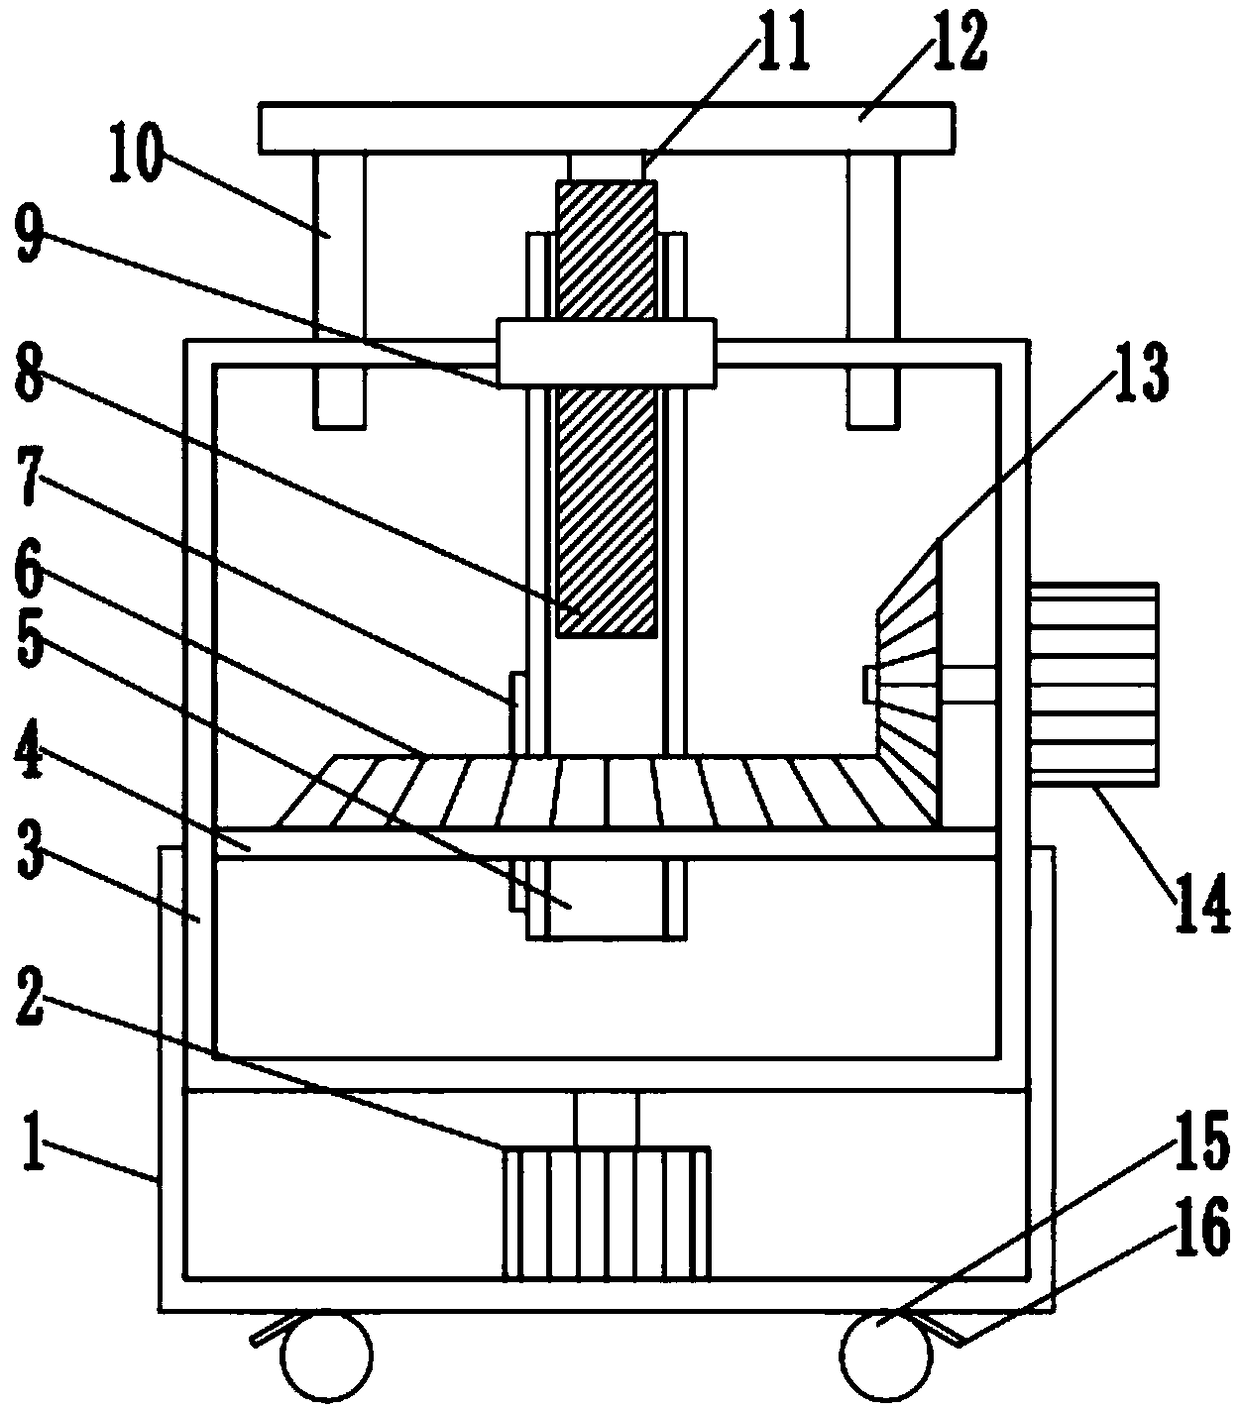 Movable projector bracket capable of finely adjusting height